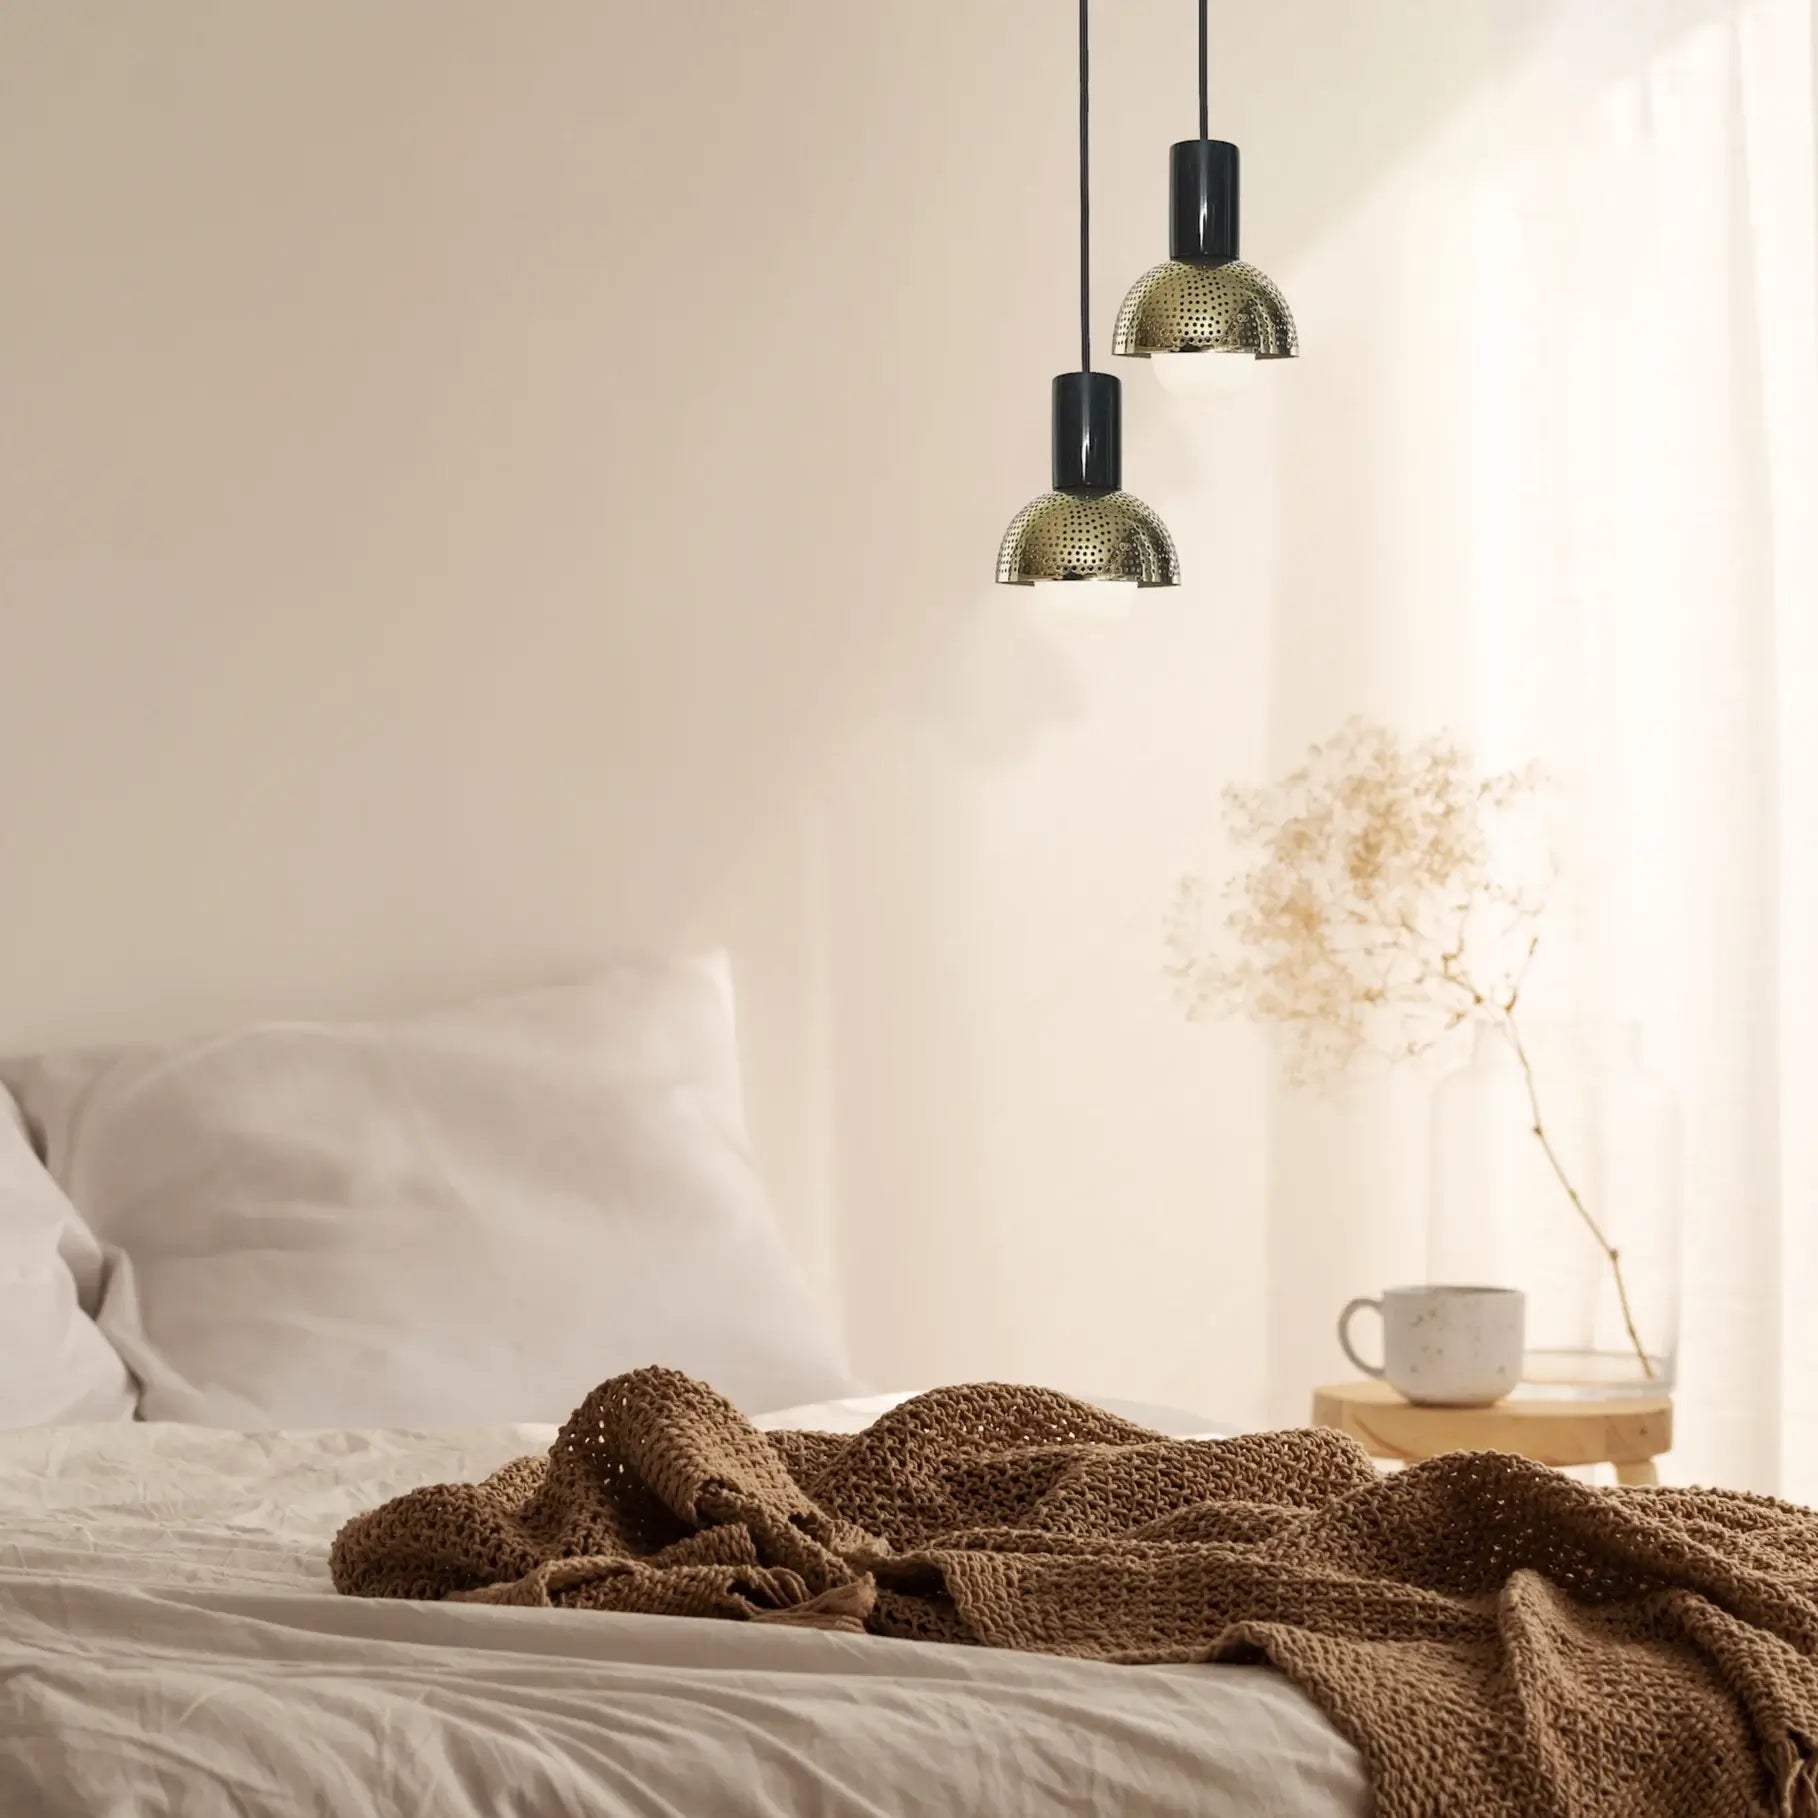 Dounia home chandeliers in Polished brass made of Metal, used as a bedroom lighting, Model: Maria 2